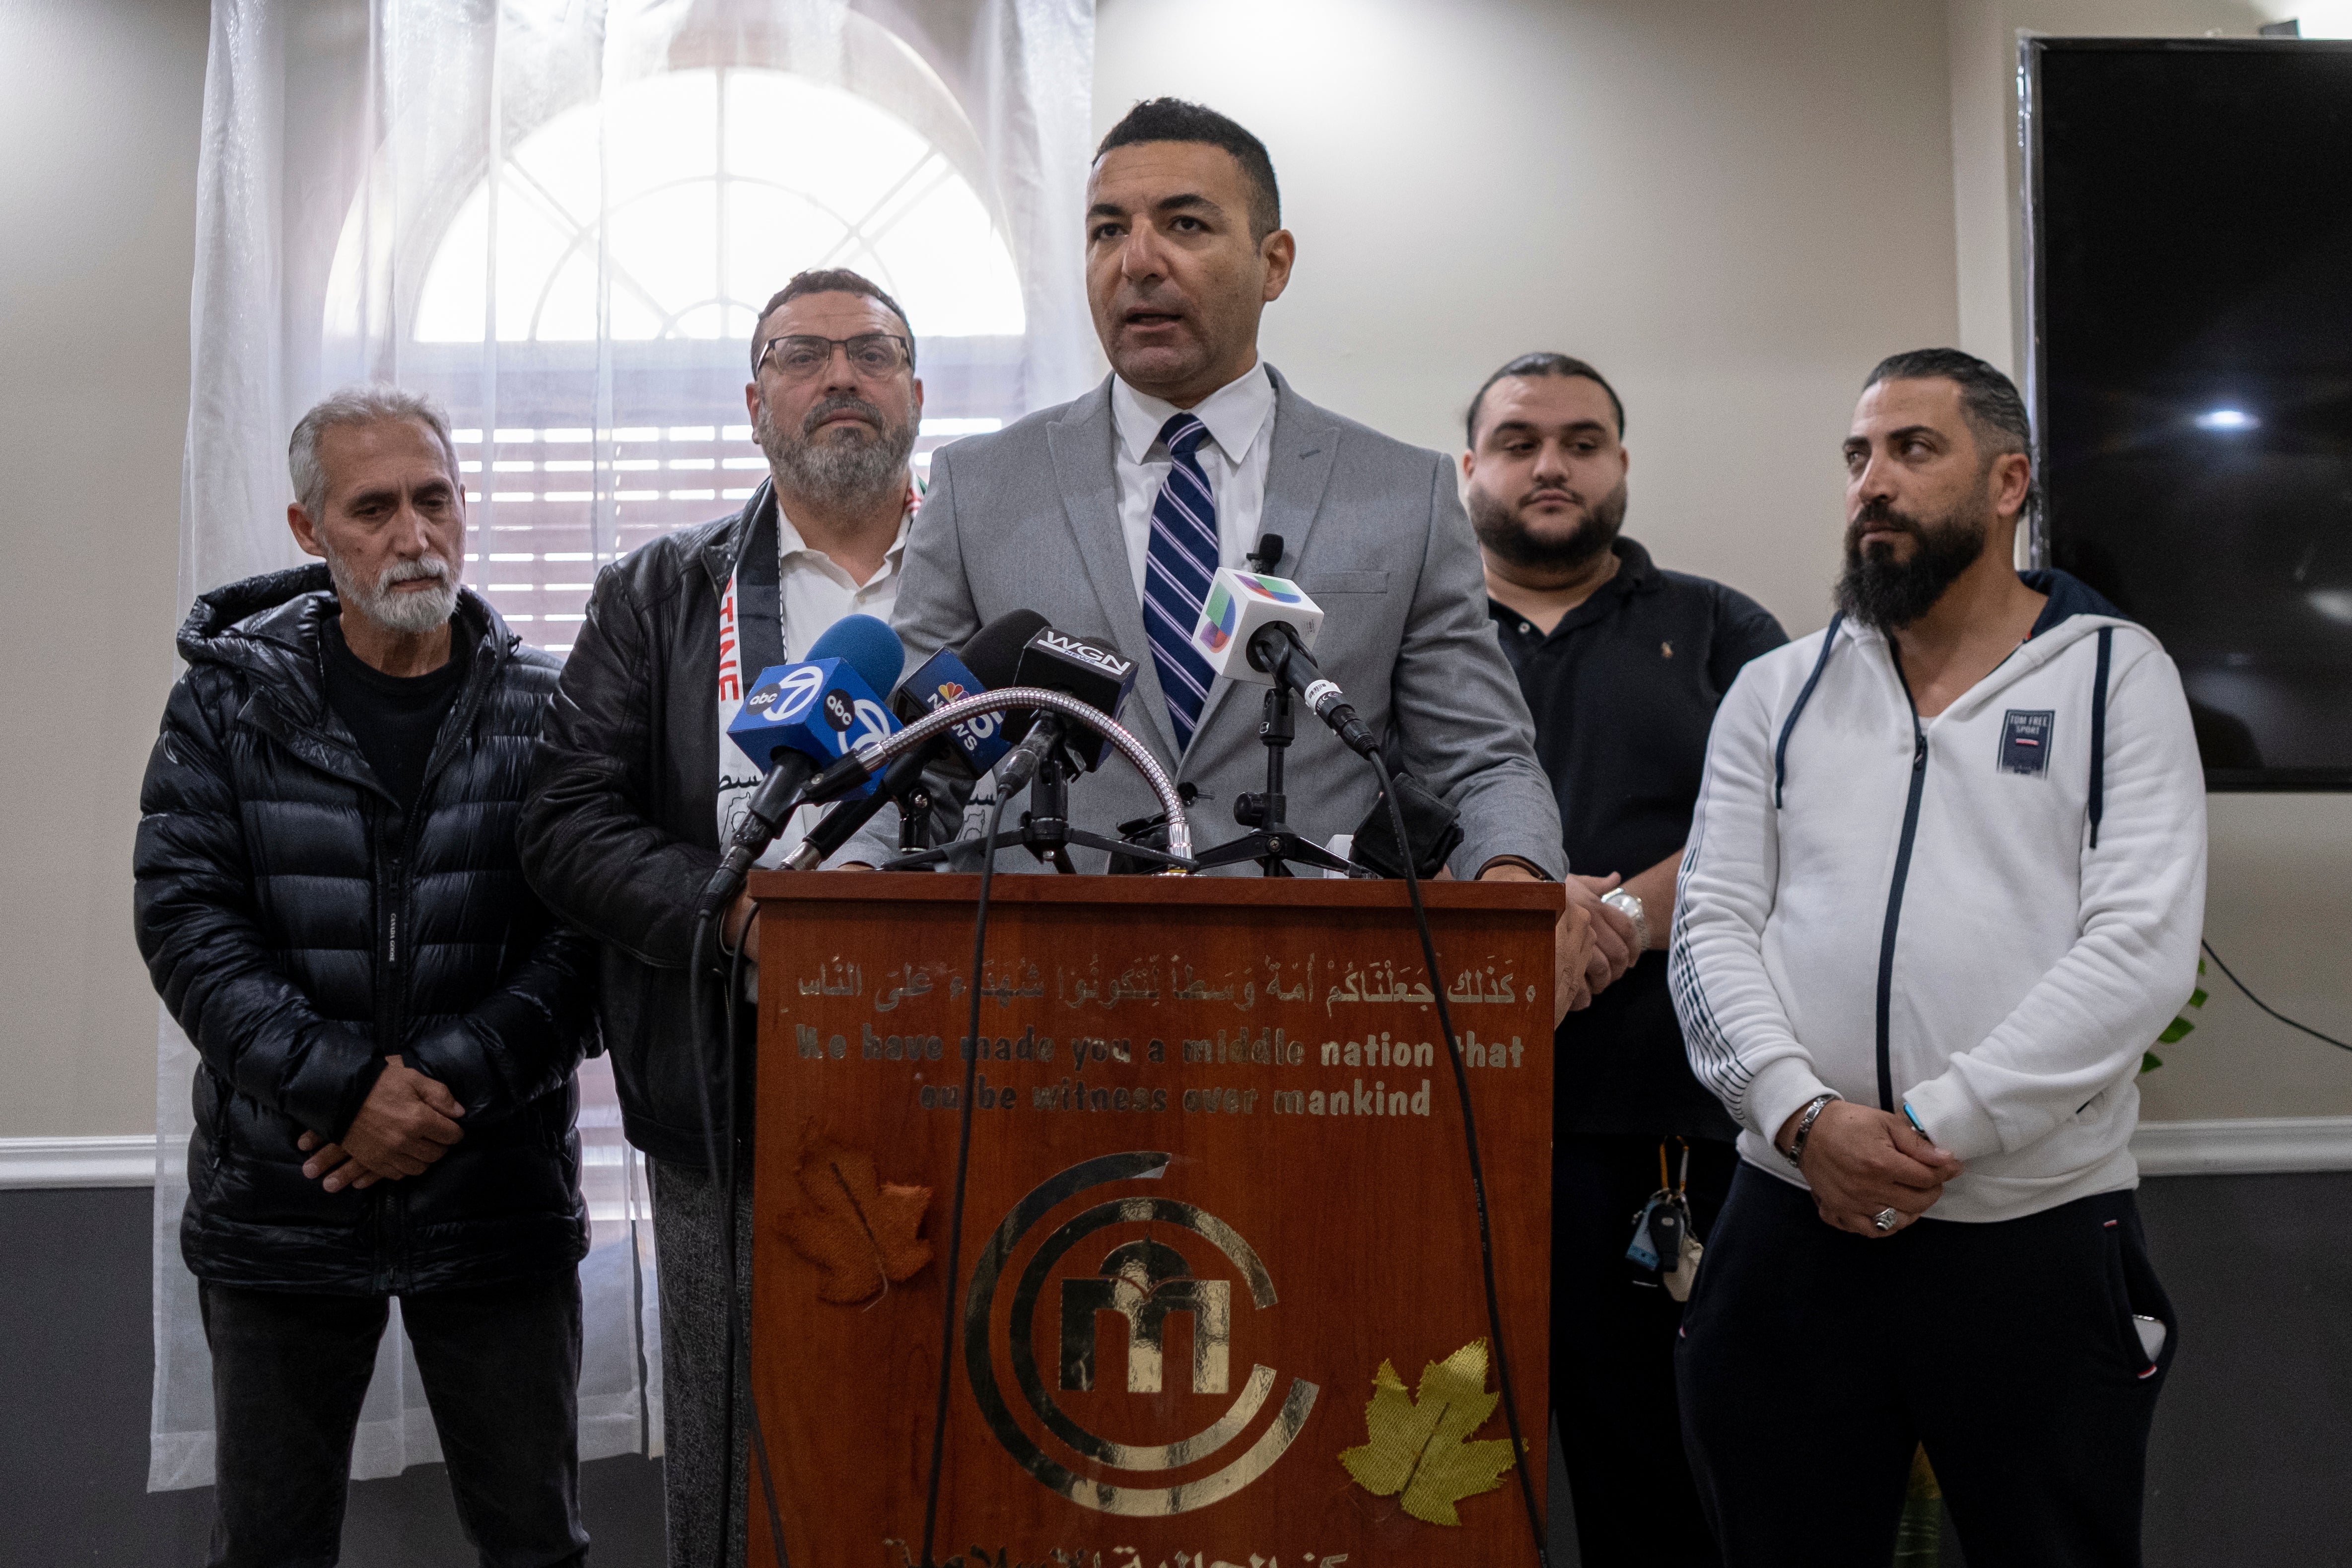 Ahmed Rehab, executive director of the Chicago chapter of the Council on American-Islamic Relations, speaks at a news conference